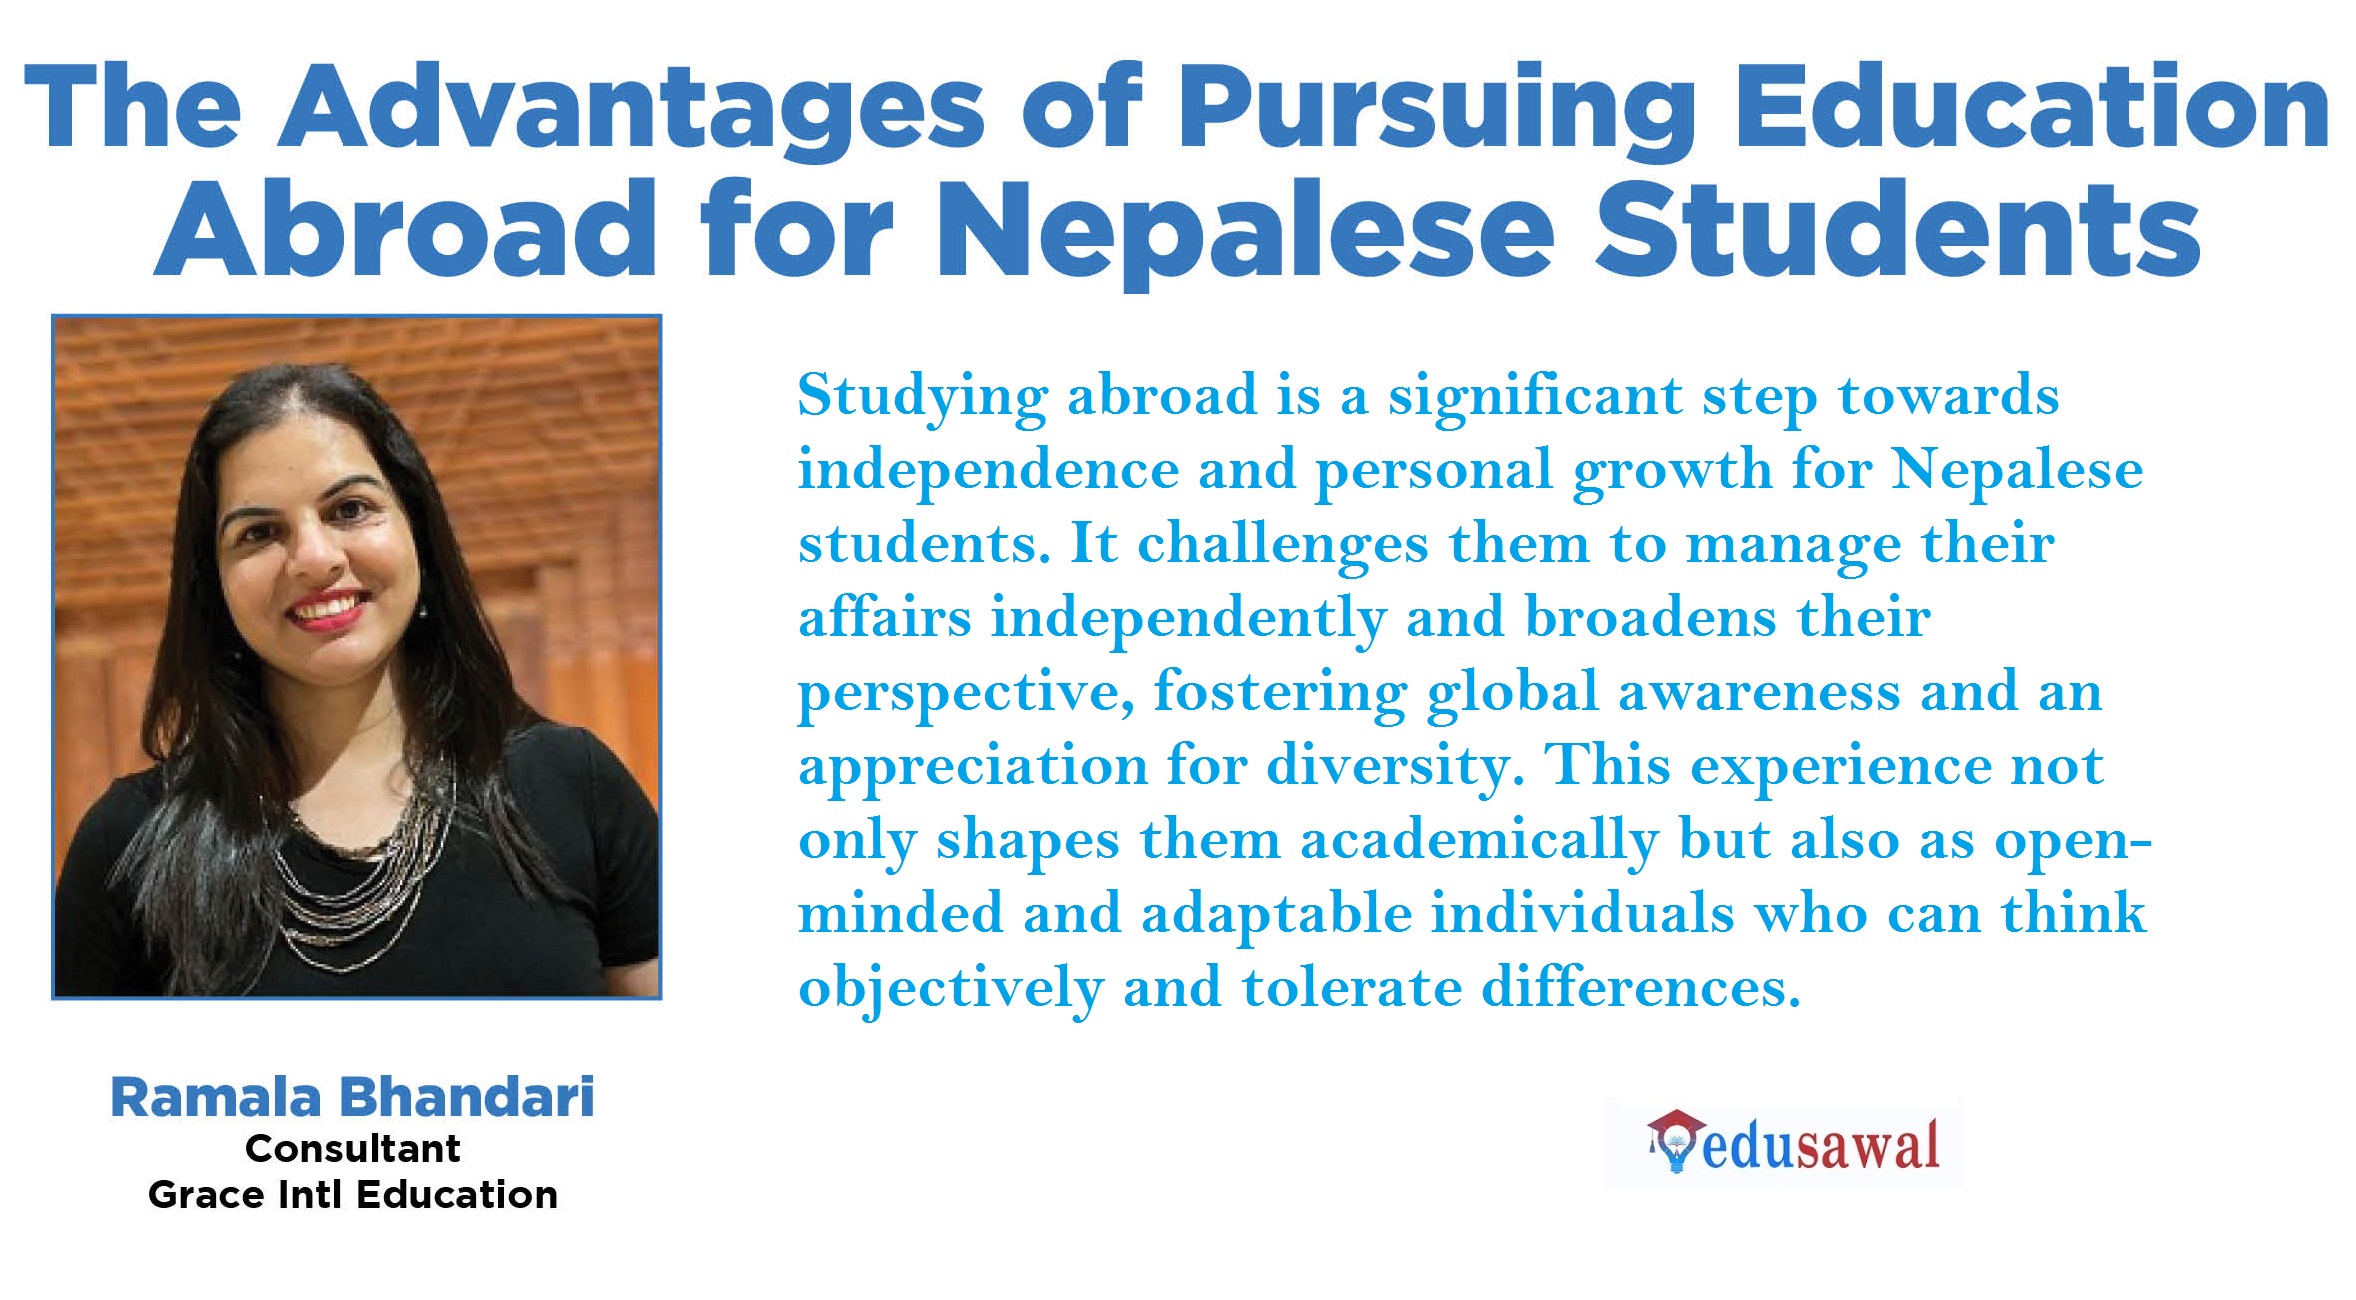 The South Asian Pursuit of Abroad Education